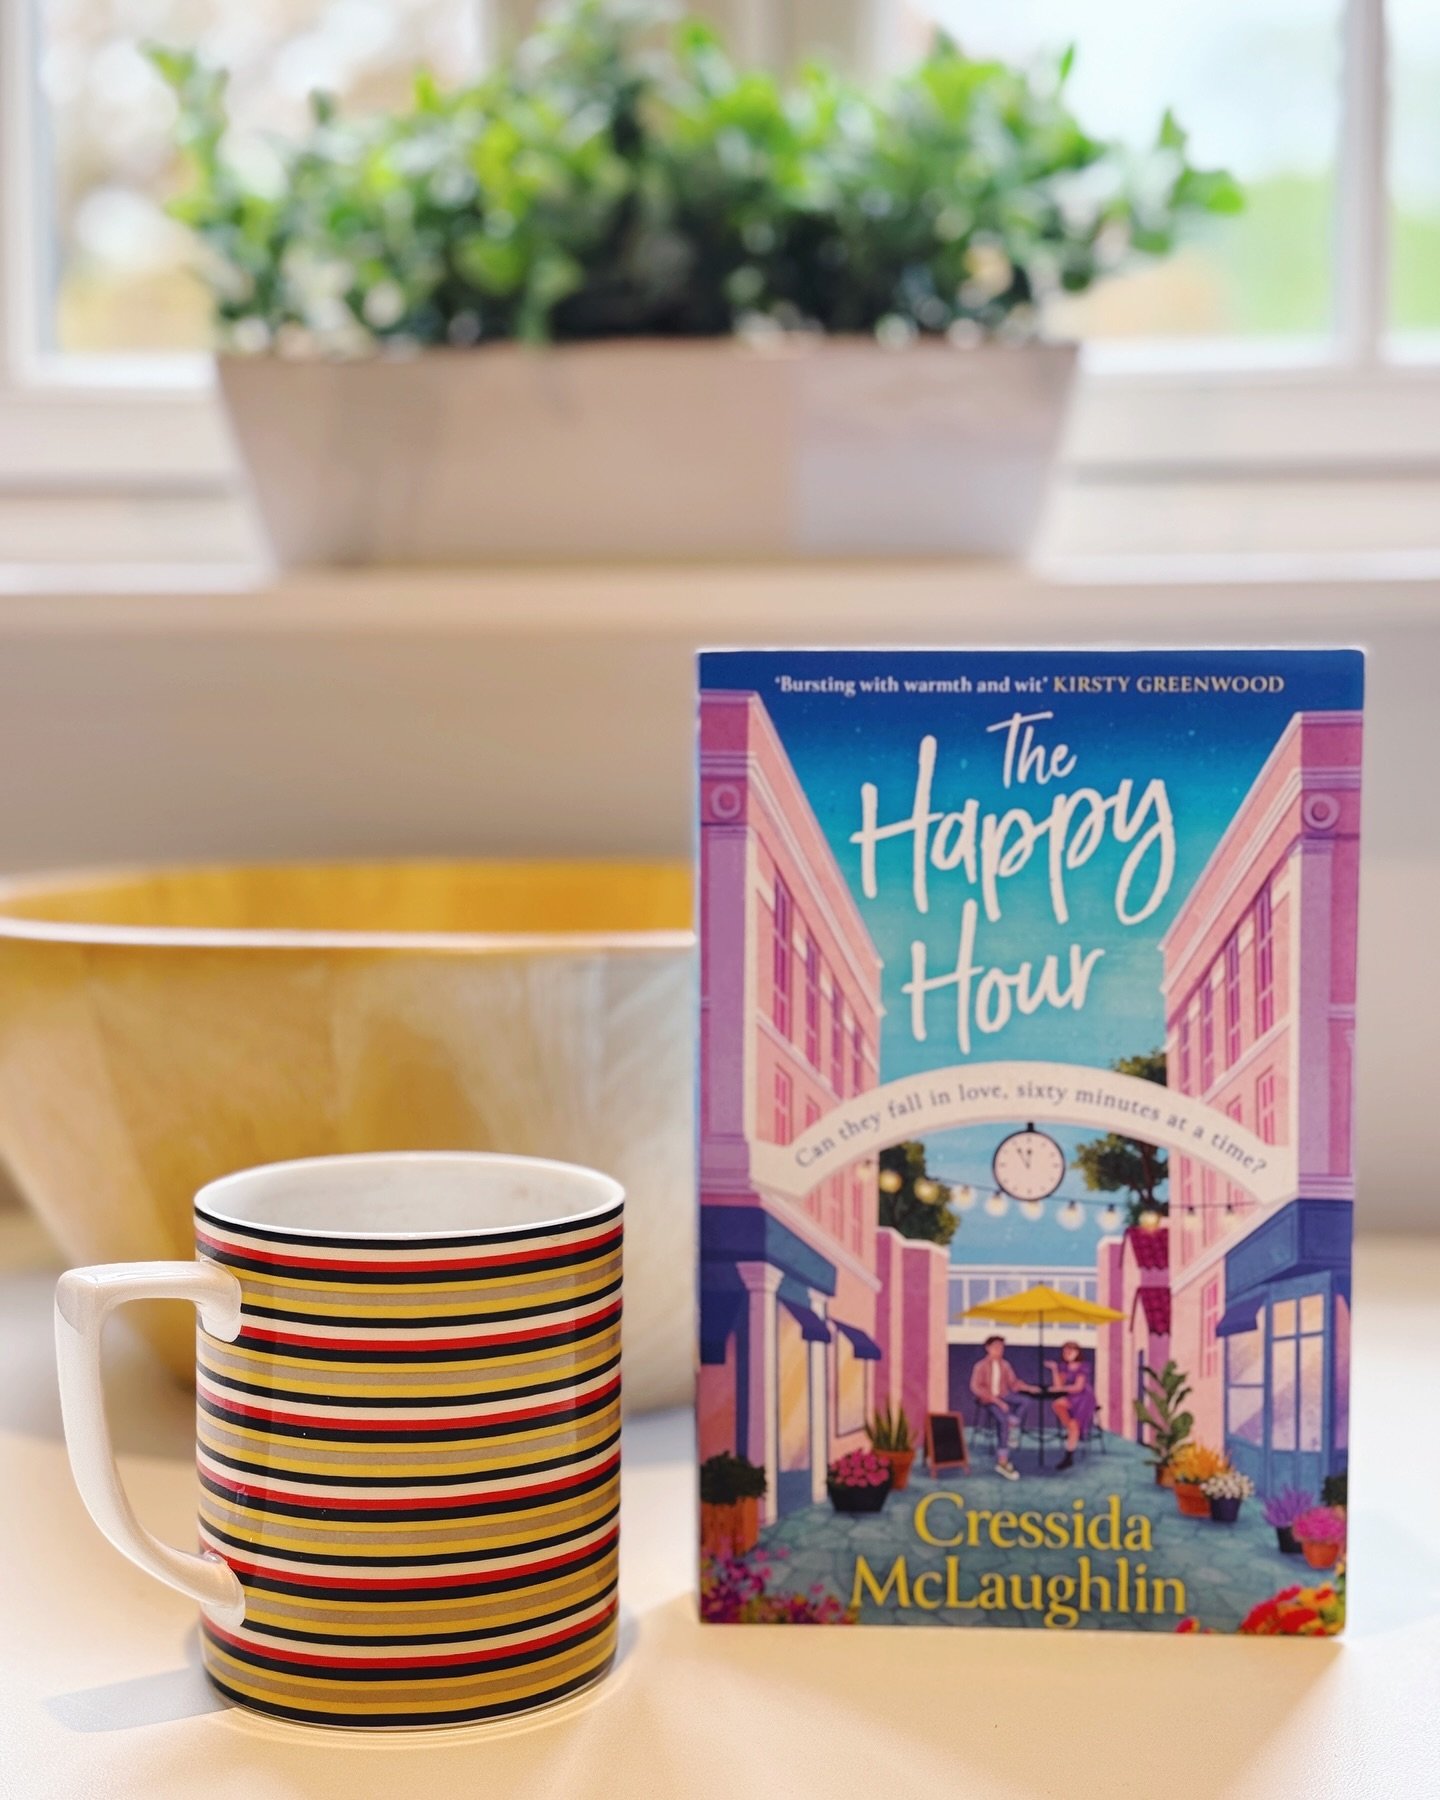 The Happy Hour has been out a week today, so I just wanted to thank you for all the love you&rsquo;ve shown it - everyone who has commented on it, told me they&rsquo;ve bought it, read it already and put reviews up on Amazon etc. (which is SO importa